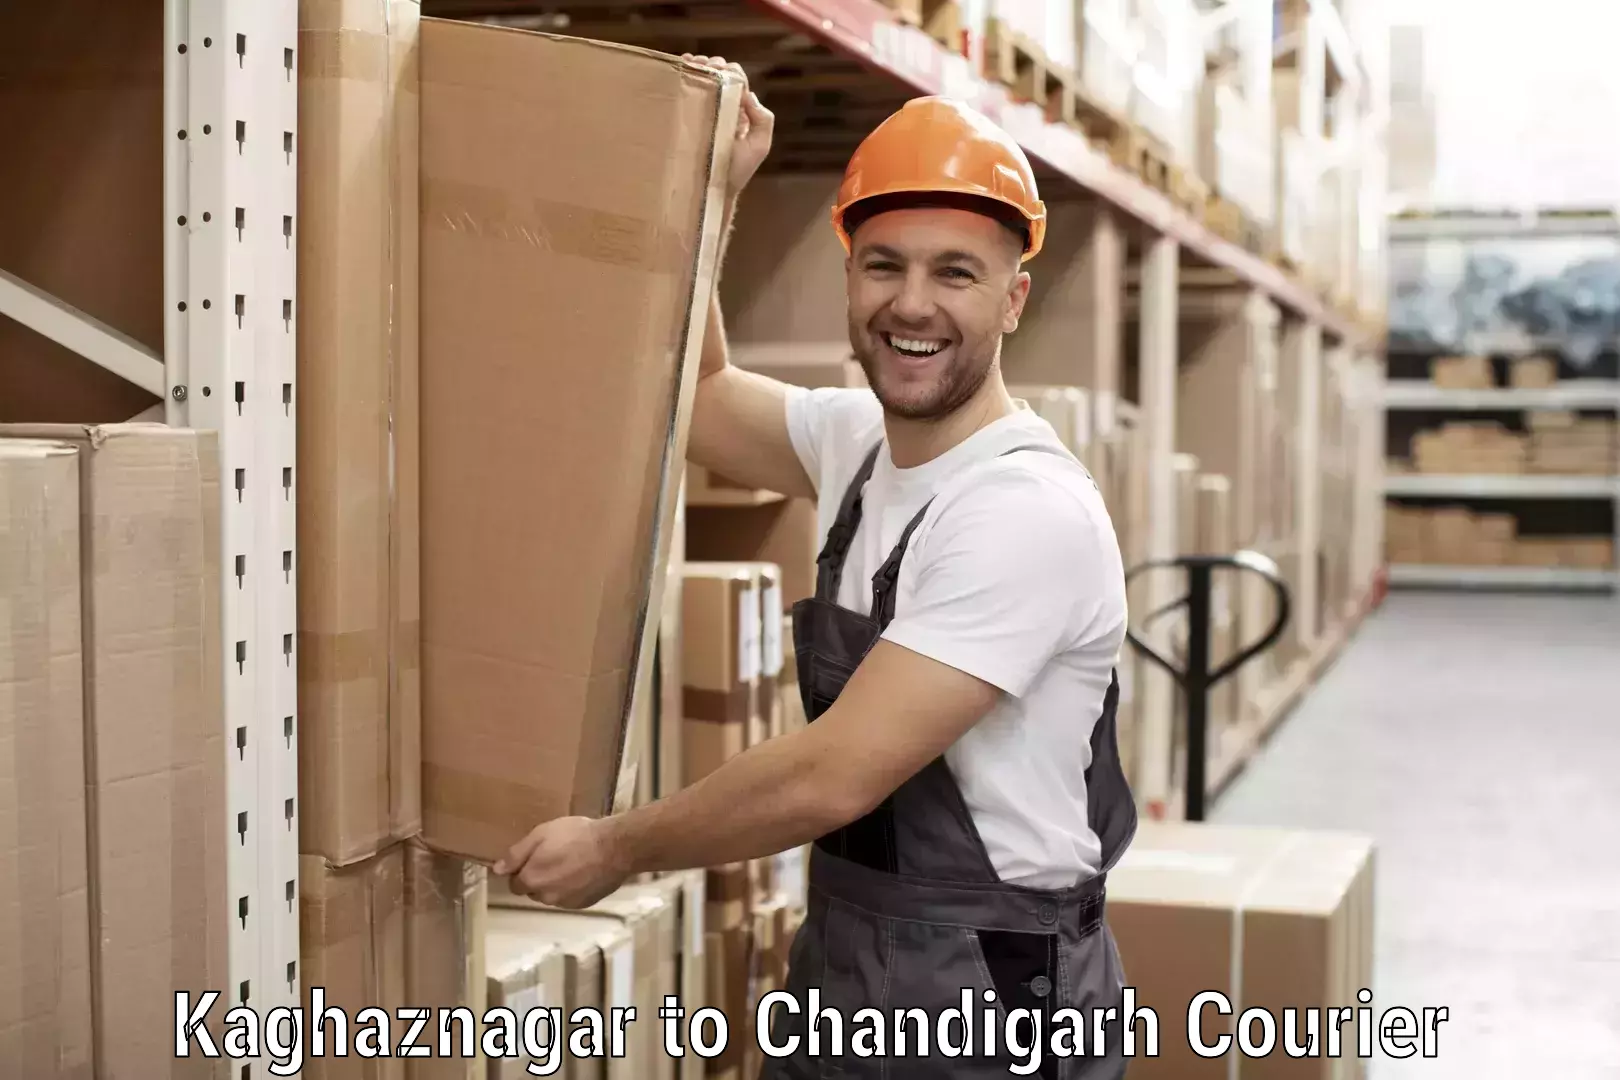 User-friendly delivery service Kaghaznagar to Chandigarh